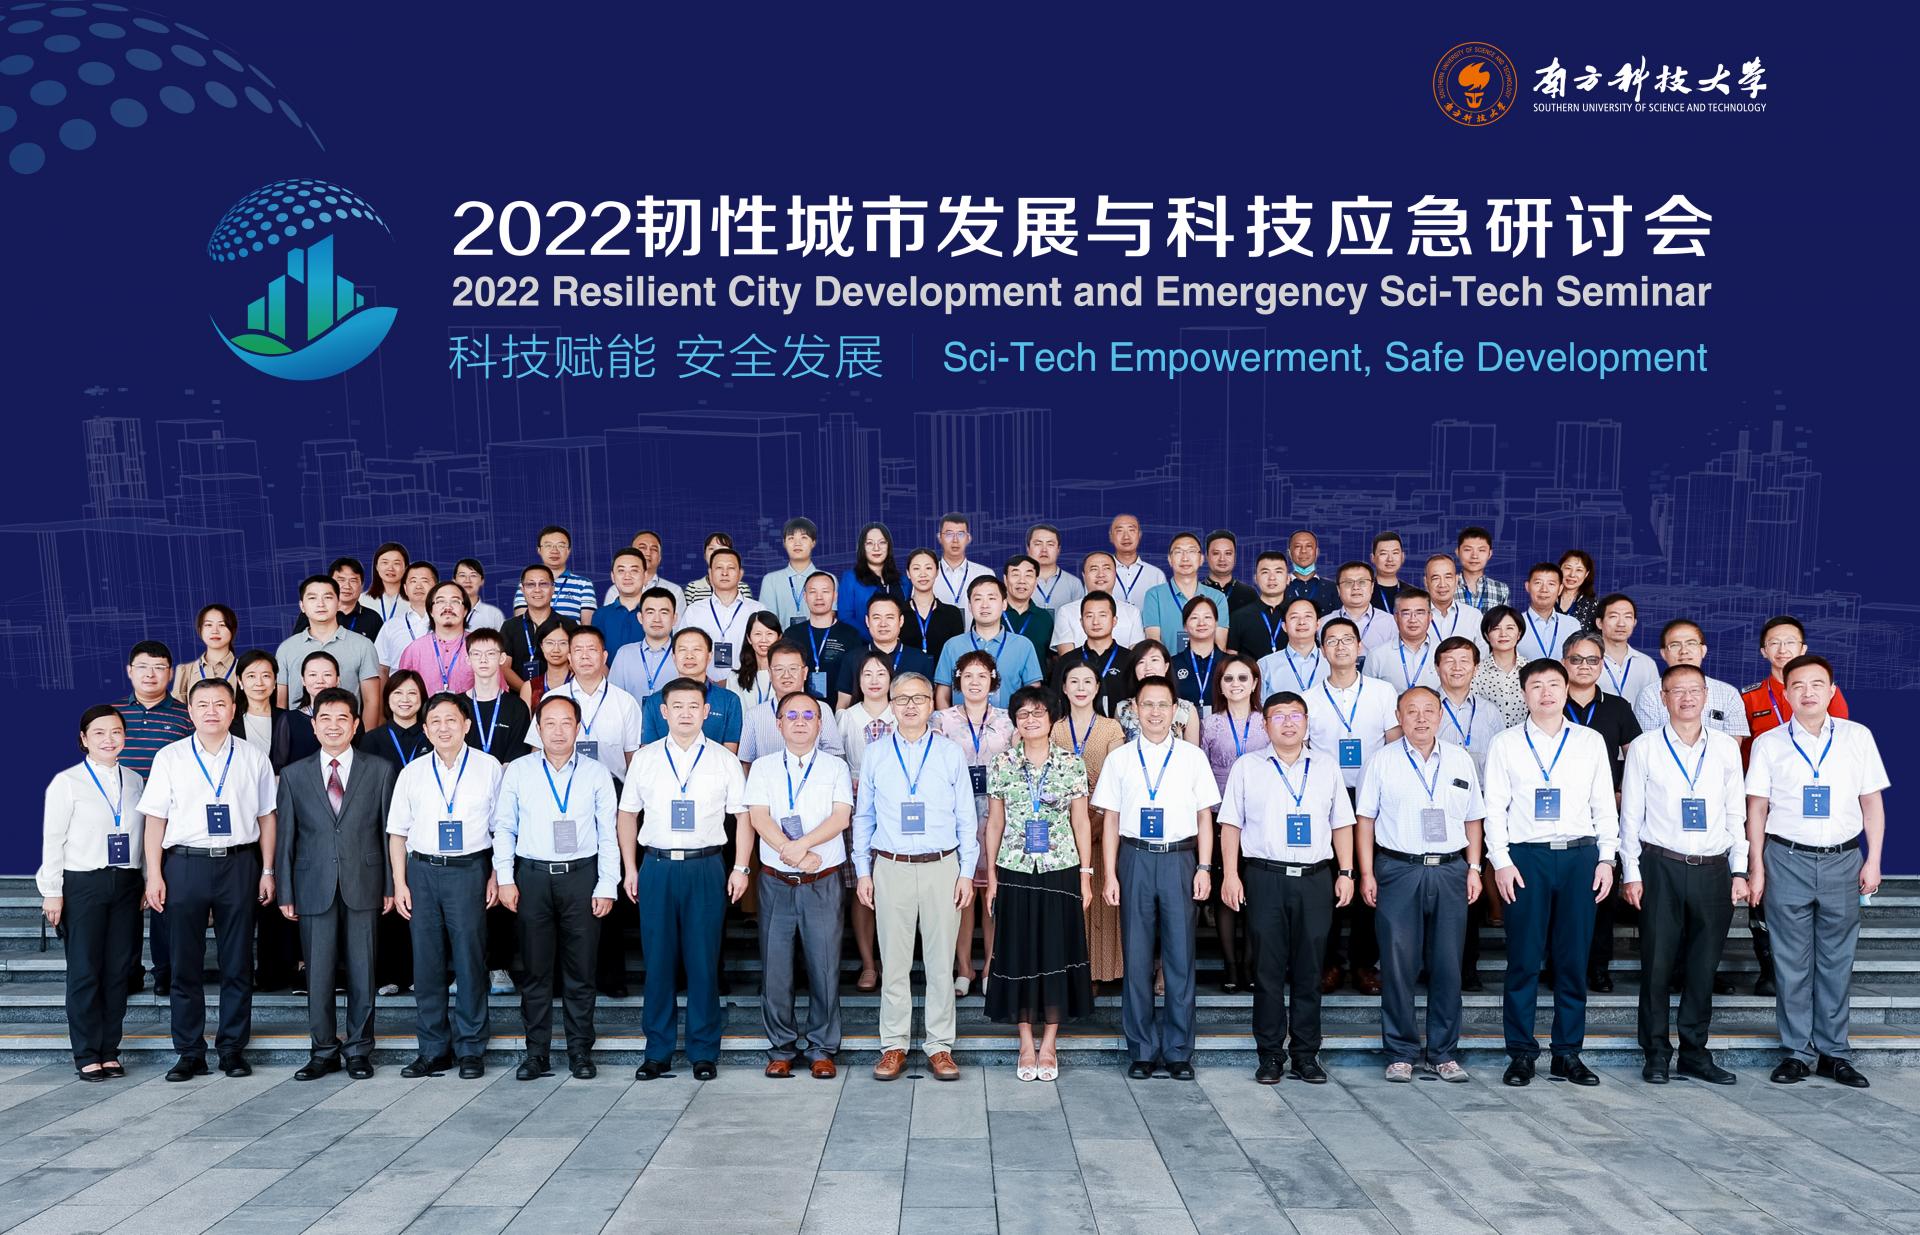 SUSTech holds 2022 Resilient City Development and Emergency Sci-Tech Seminar